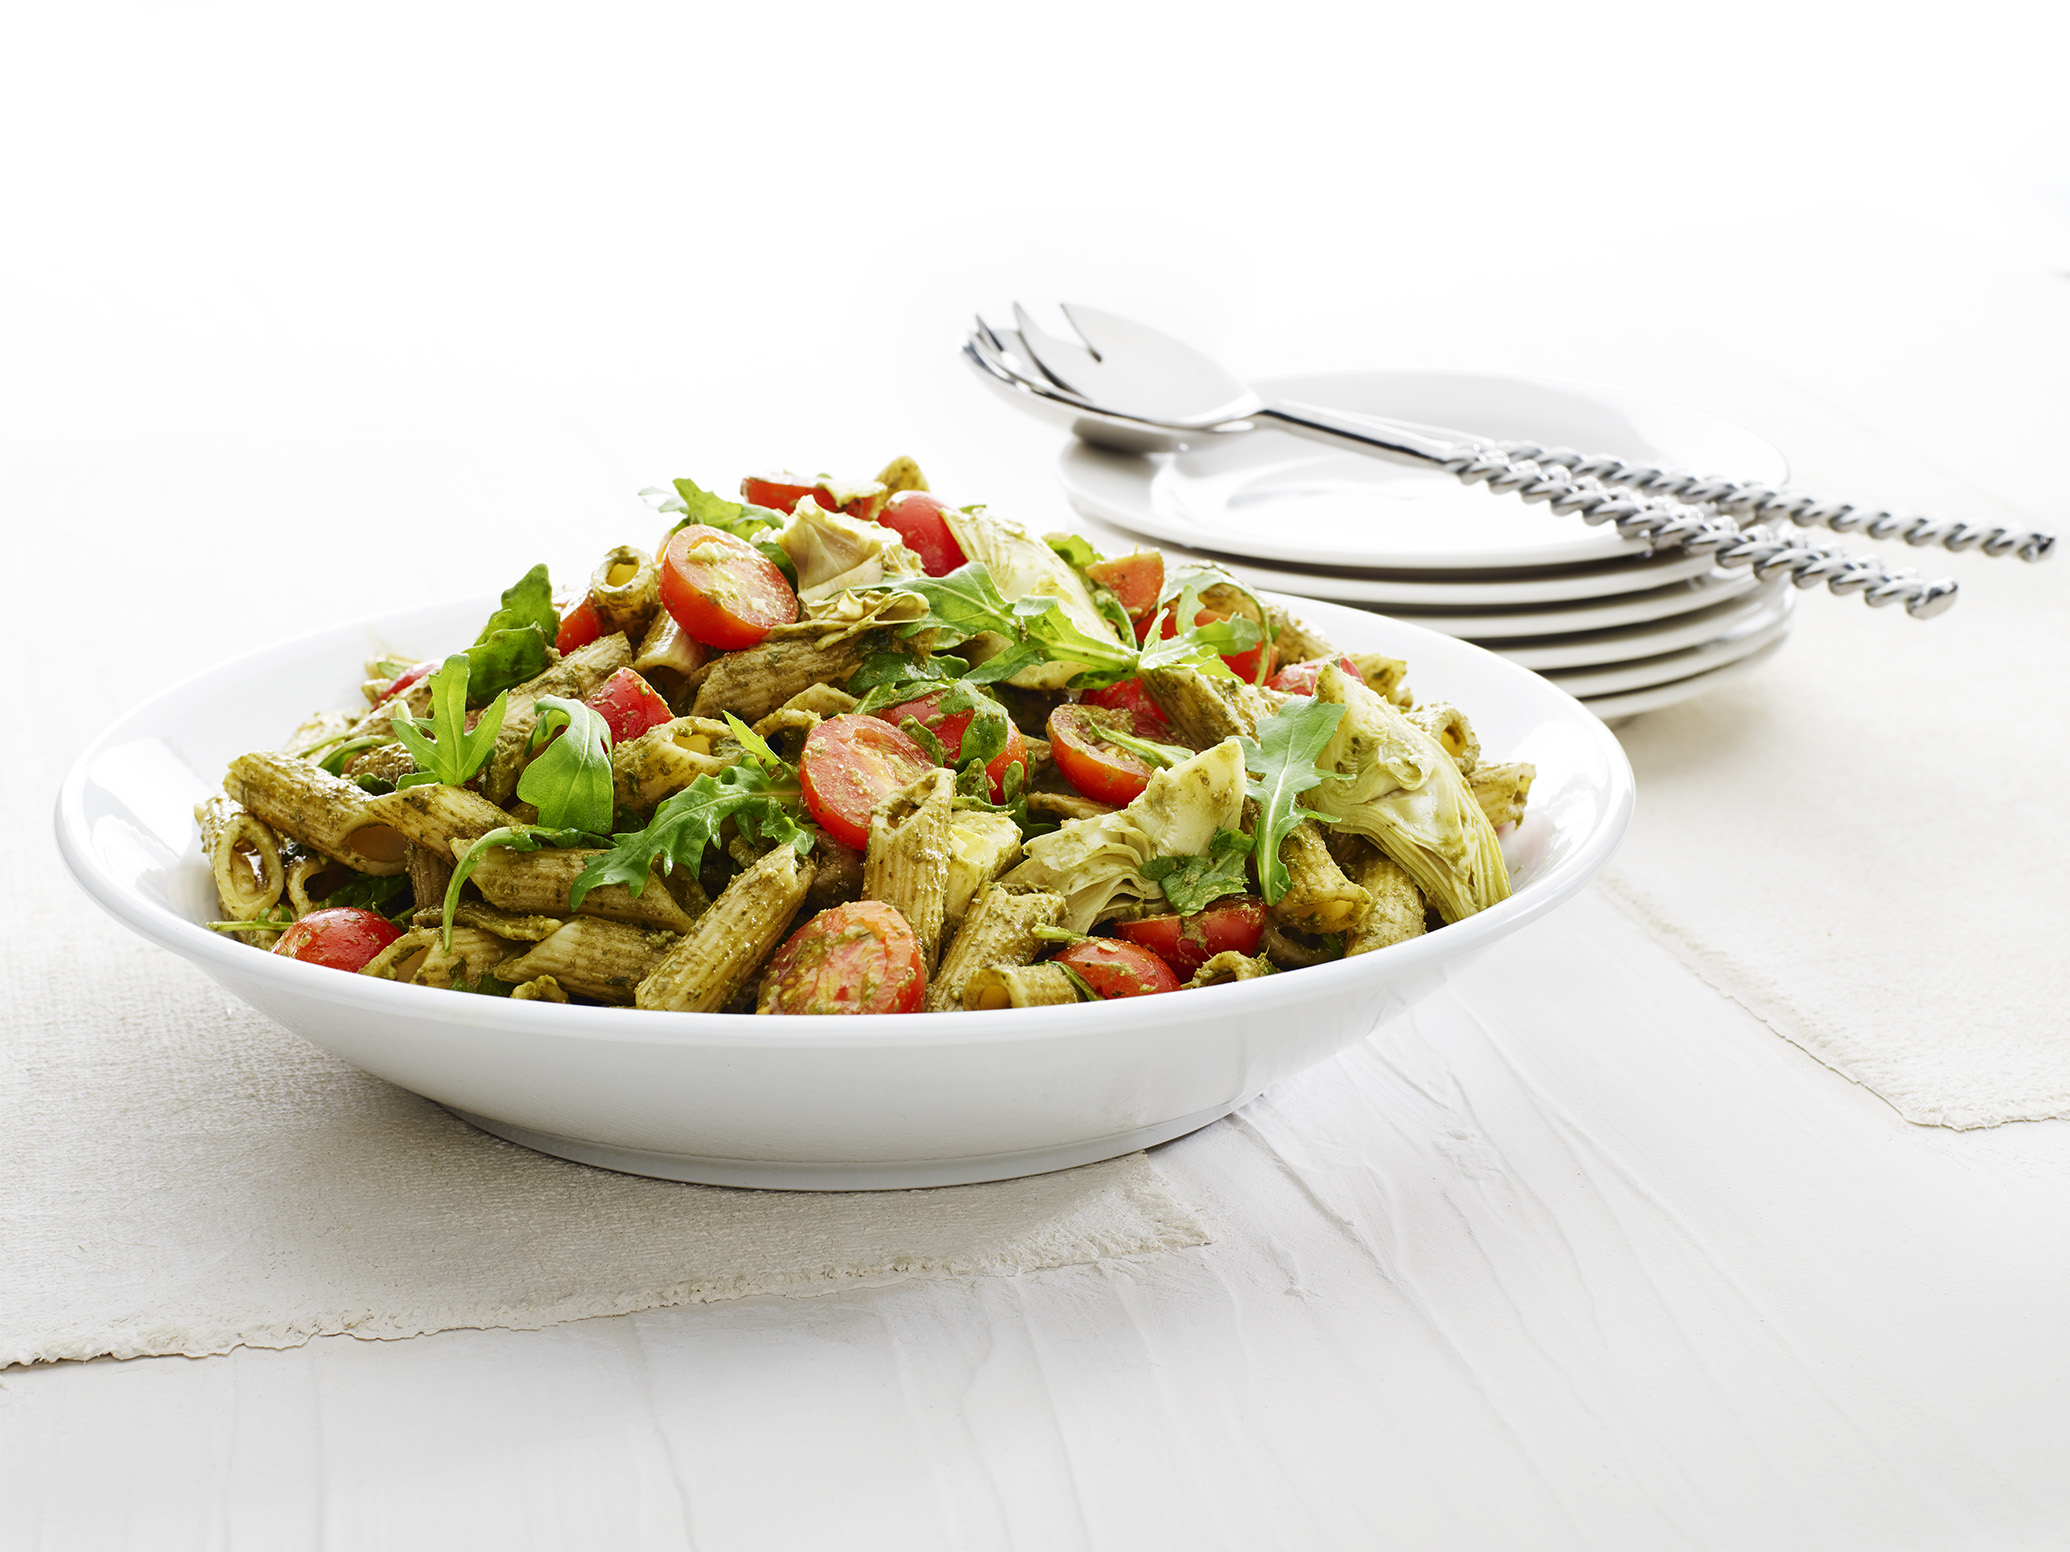 Bowl of pasta with green pesto sauce and cherry tomatoes